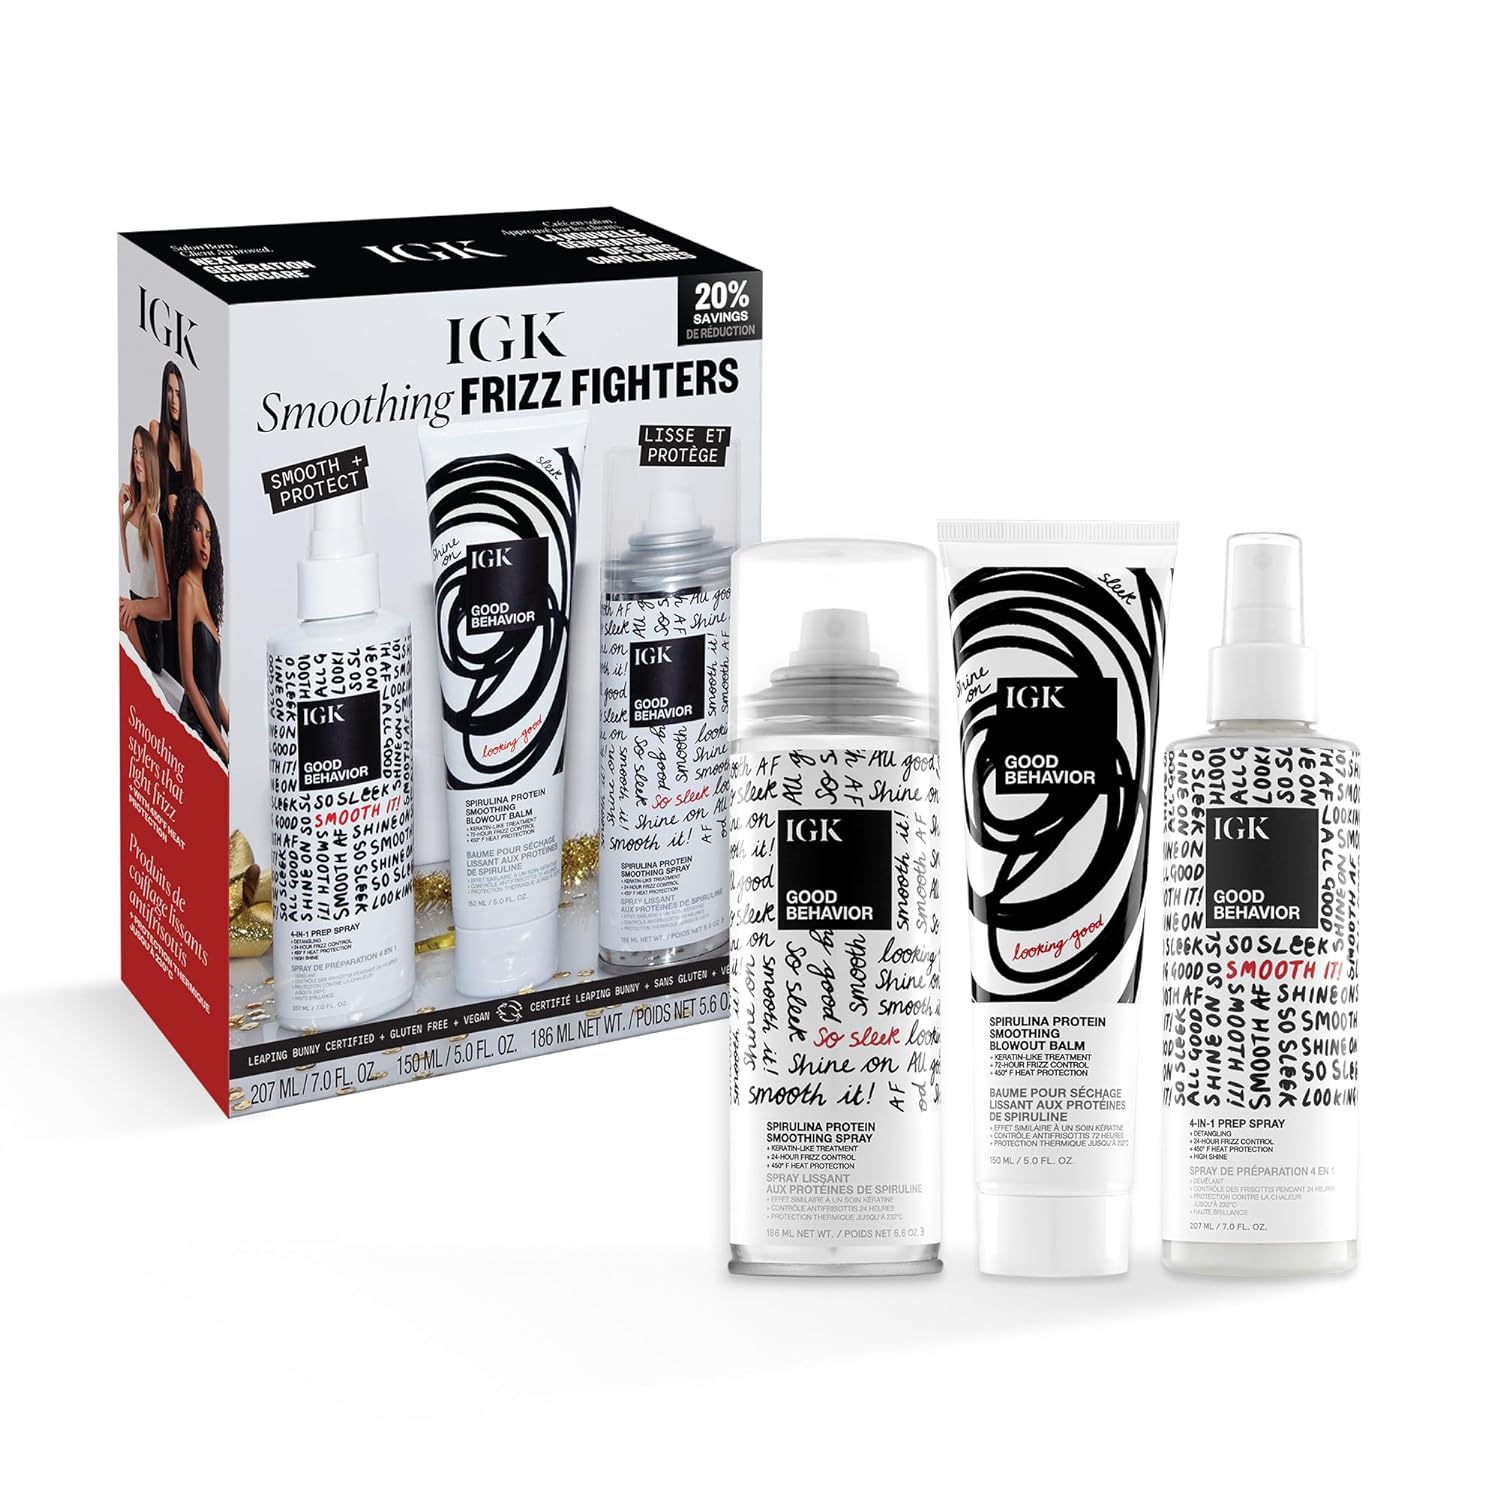 IGK Releases a New Limited Edition Pre Party Hair Strobing Glitter Spray